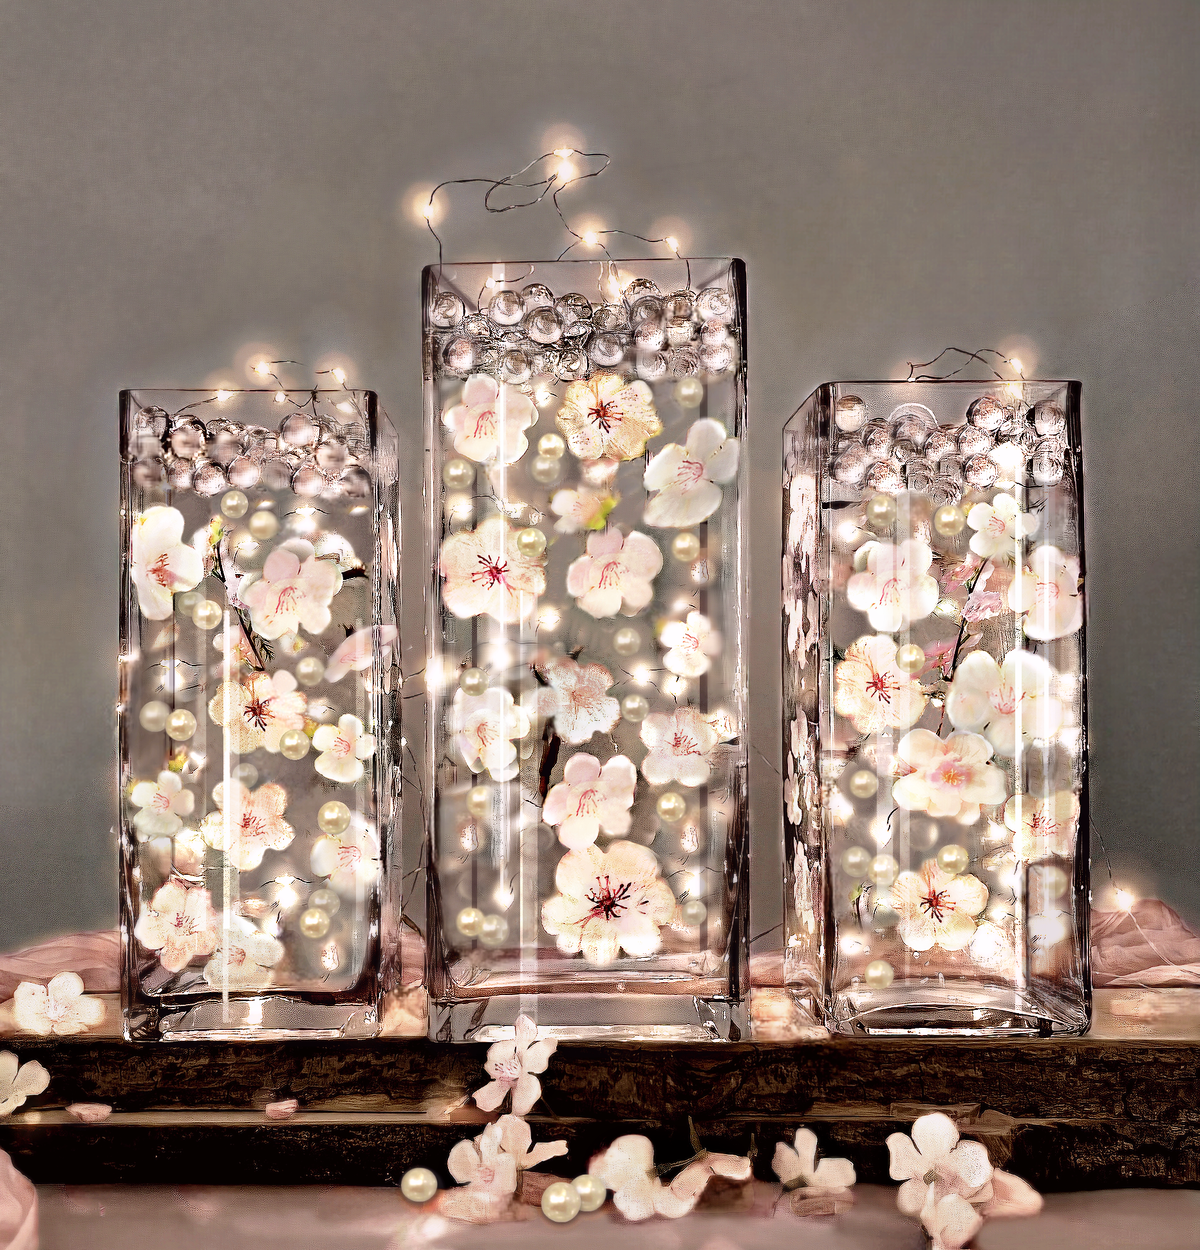 60 Floating White/Ivory/Pink Cherry Blossoms Flowers with Matching Pearls or Tumbled Glass-Fills 1 Gallon of Floating Gels for the Floating Effect-With Exclusive Measured Floating Prep Bag-Option:3 Submersible Fairy Lights Strings